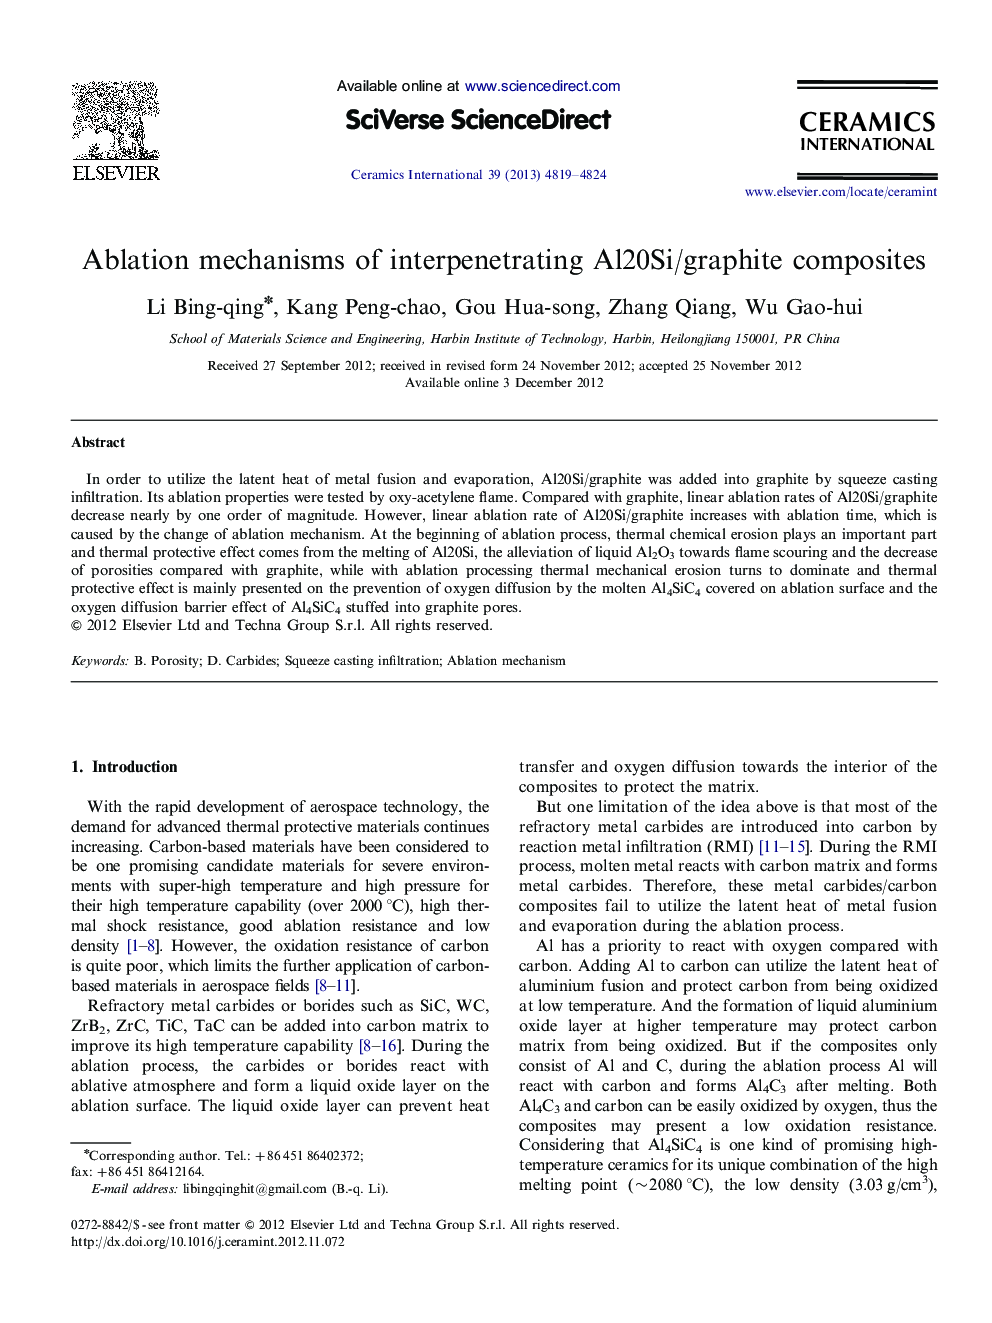 Ablation mechanisms of interpenetrating Al20Si/graphite composites